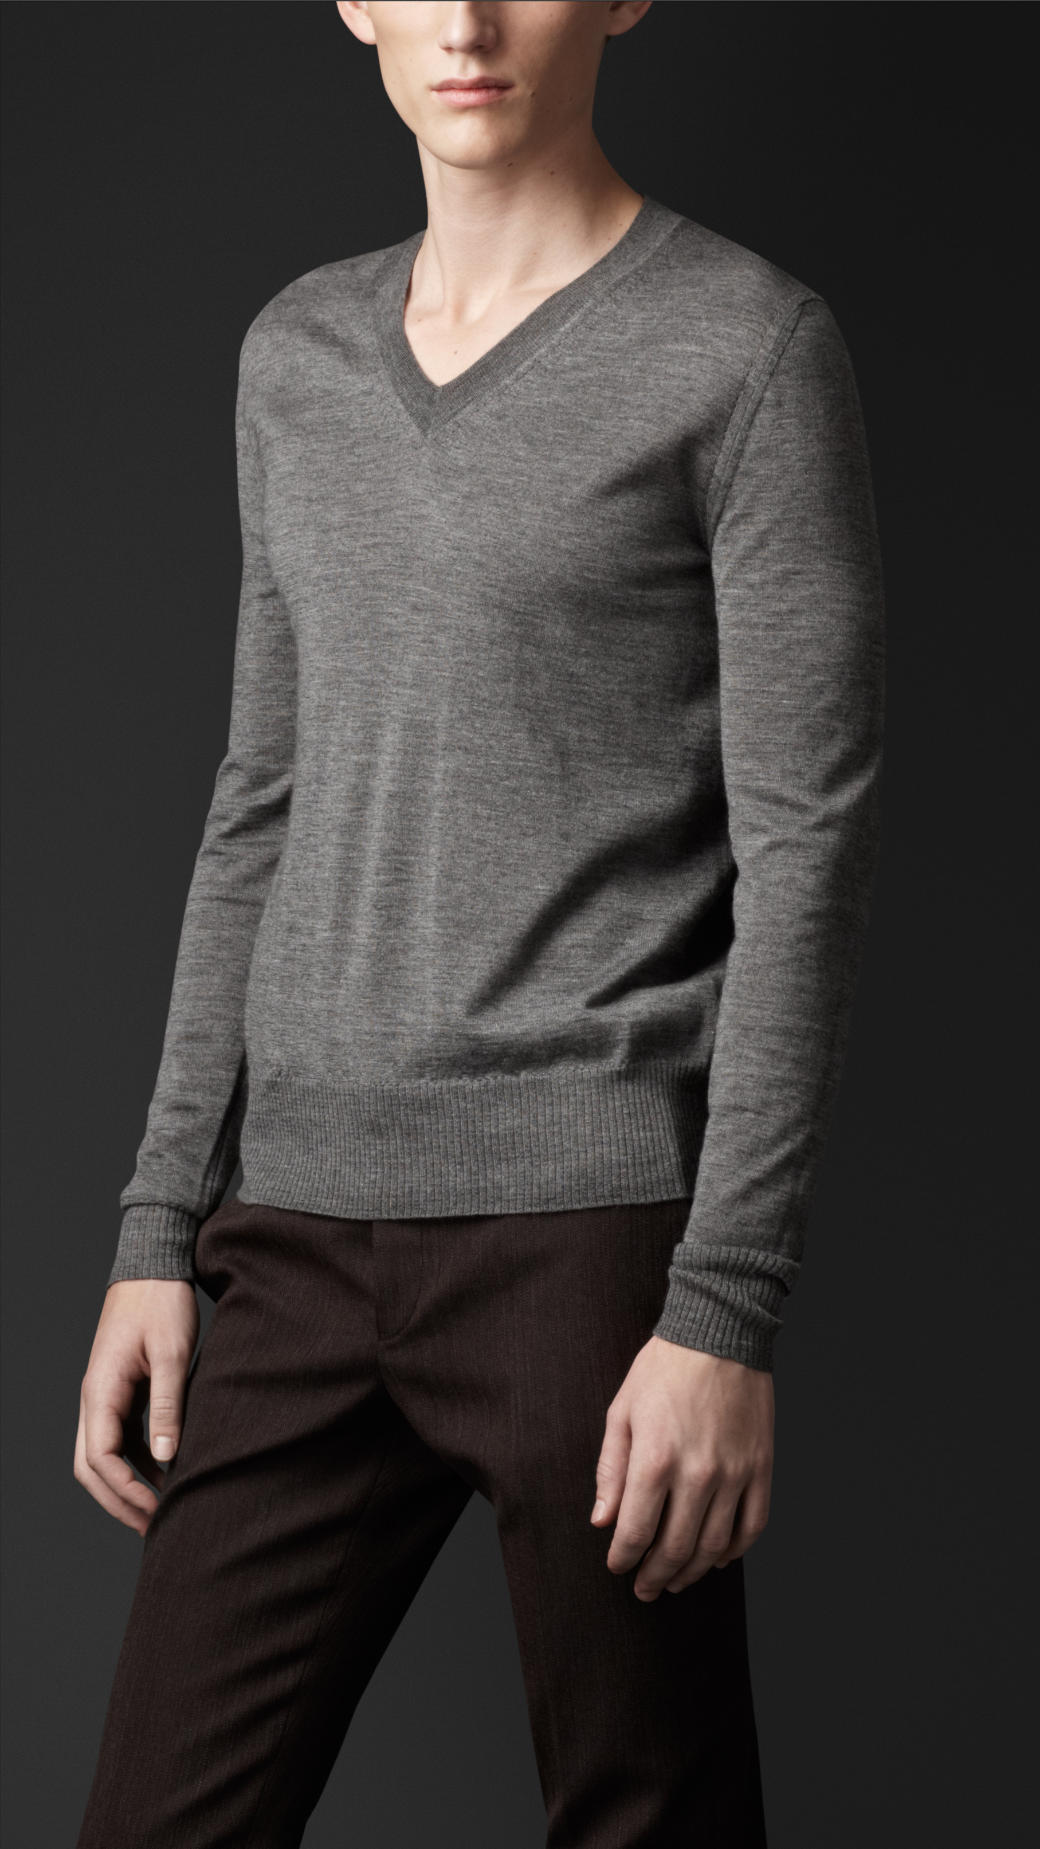 Lyst - Burberry Cashmere Silk V-neck Sweater in Gray for Men